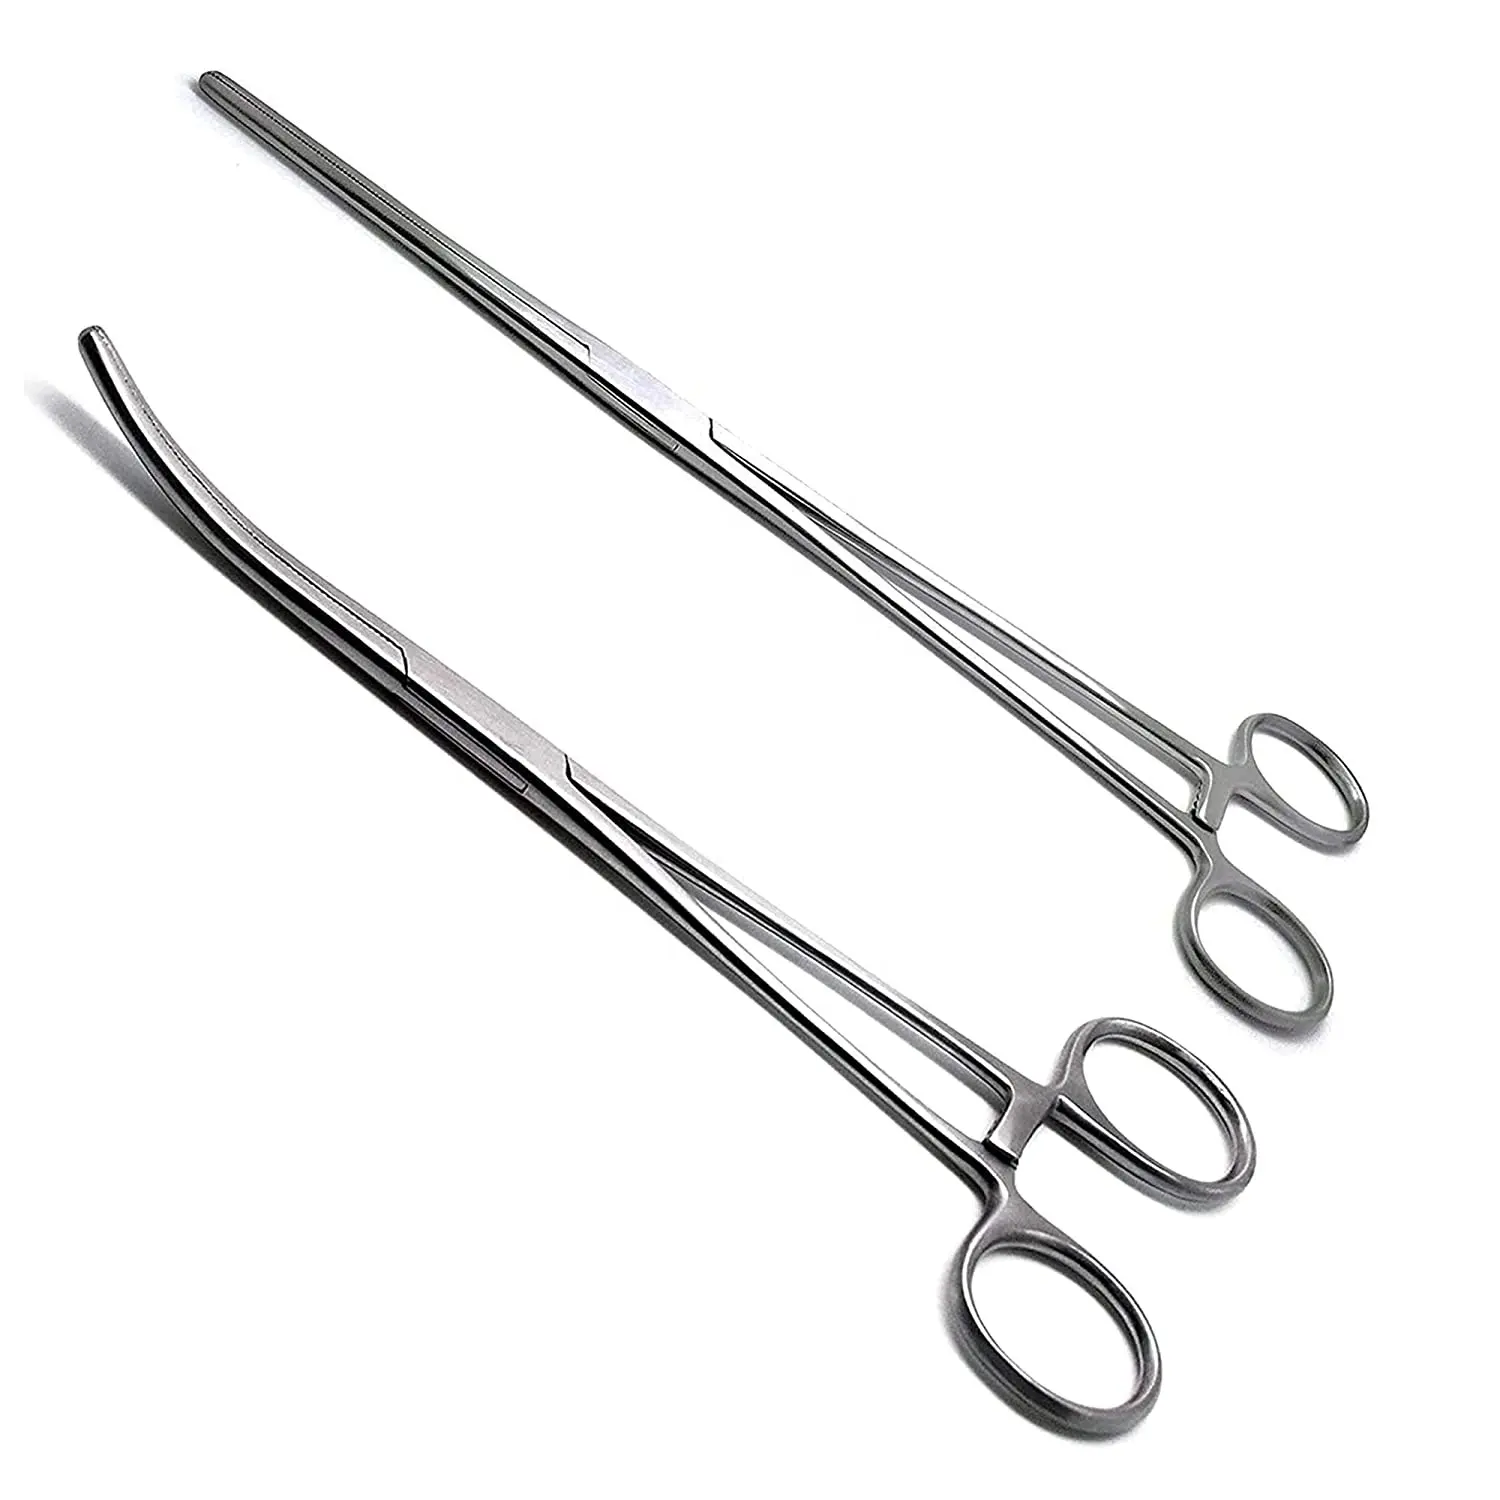 Rochester Pean Hemostat Forceps 12" Straight or Curved Clamps Three Locking Positions surgical instruments